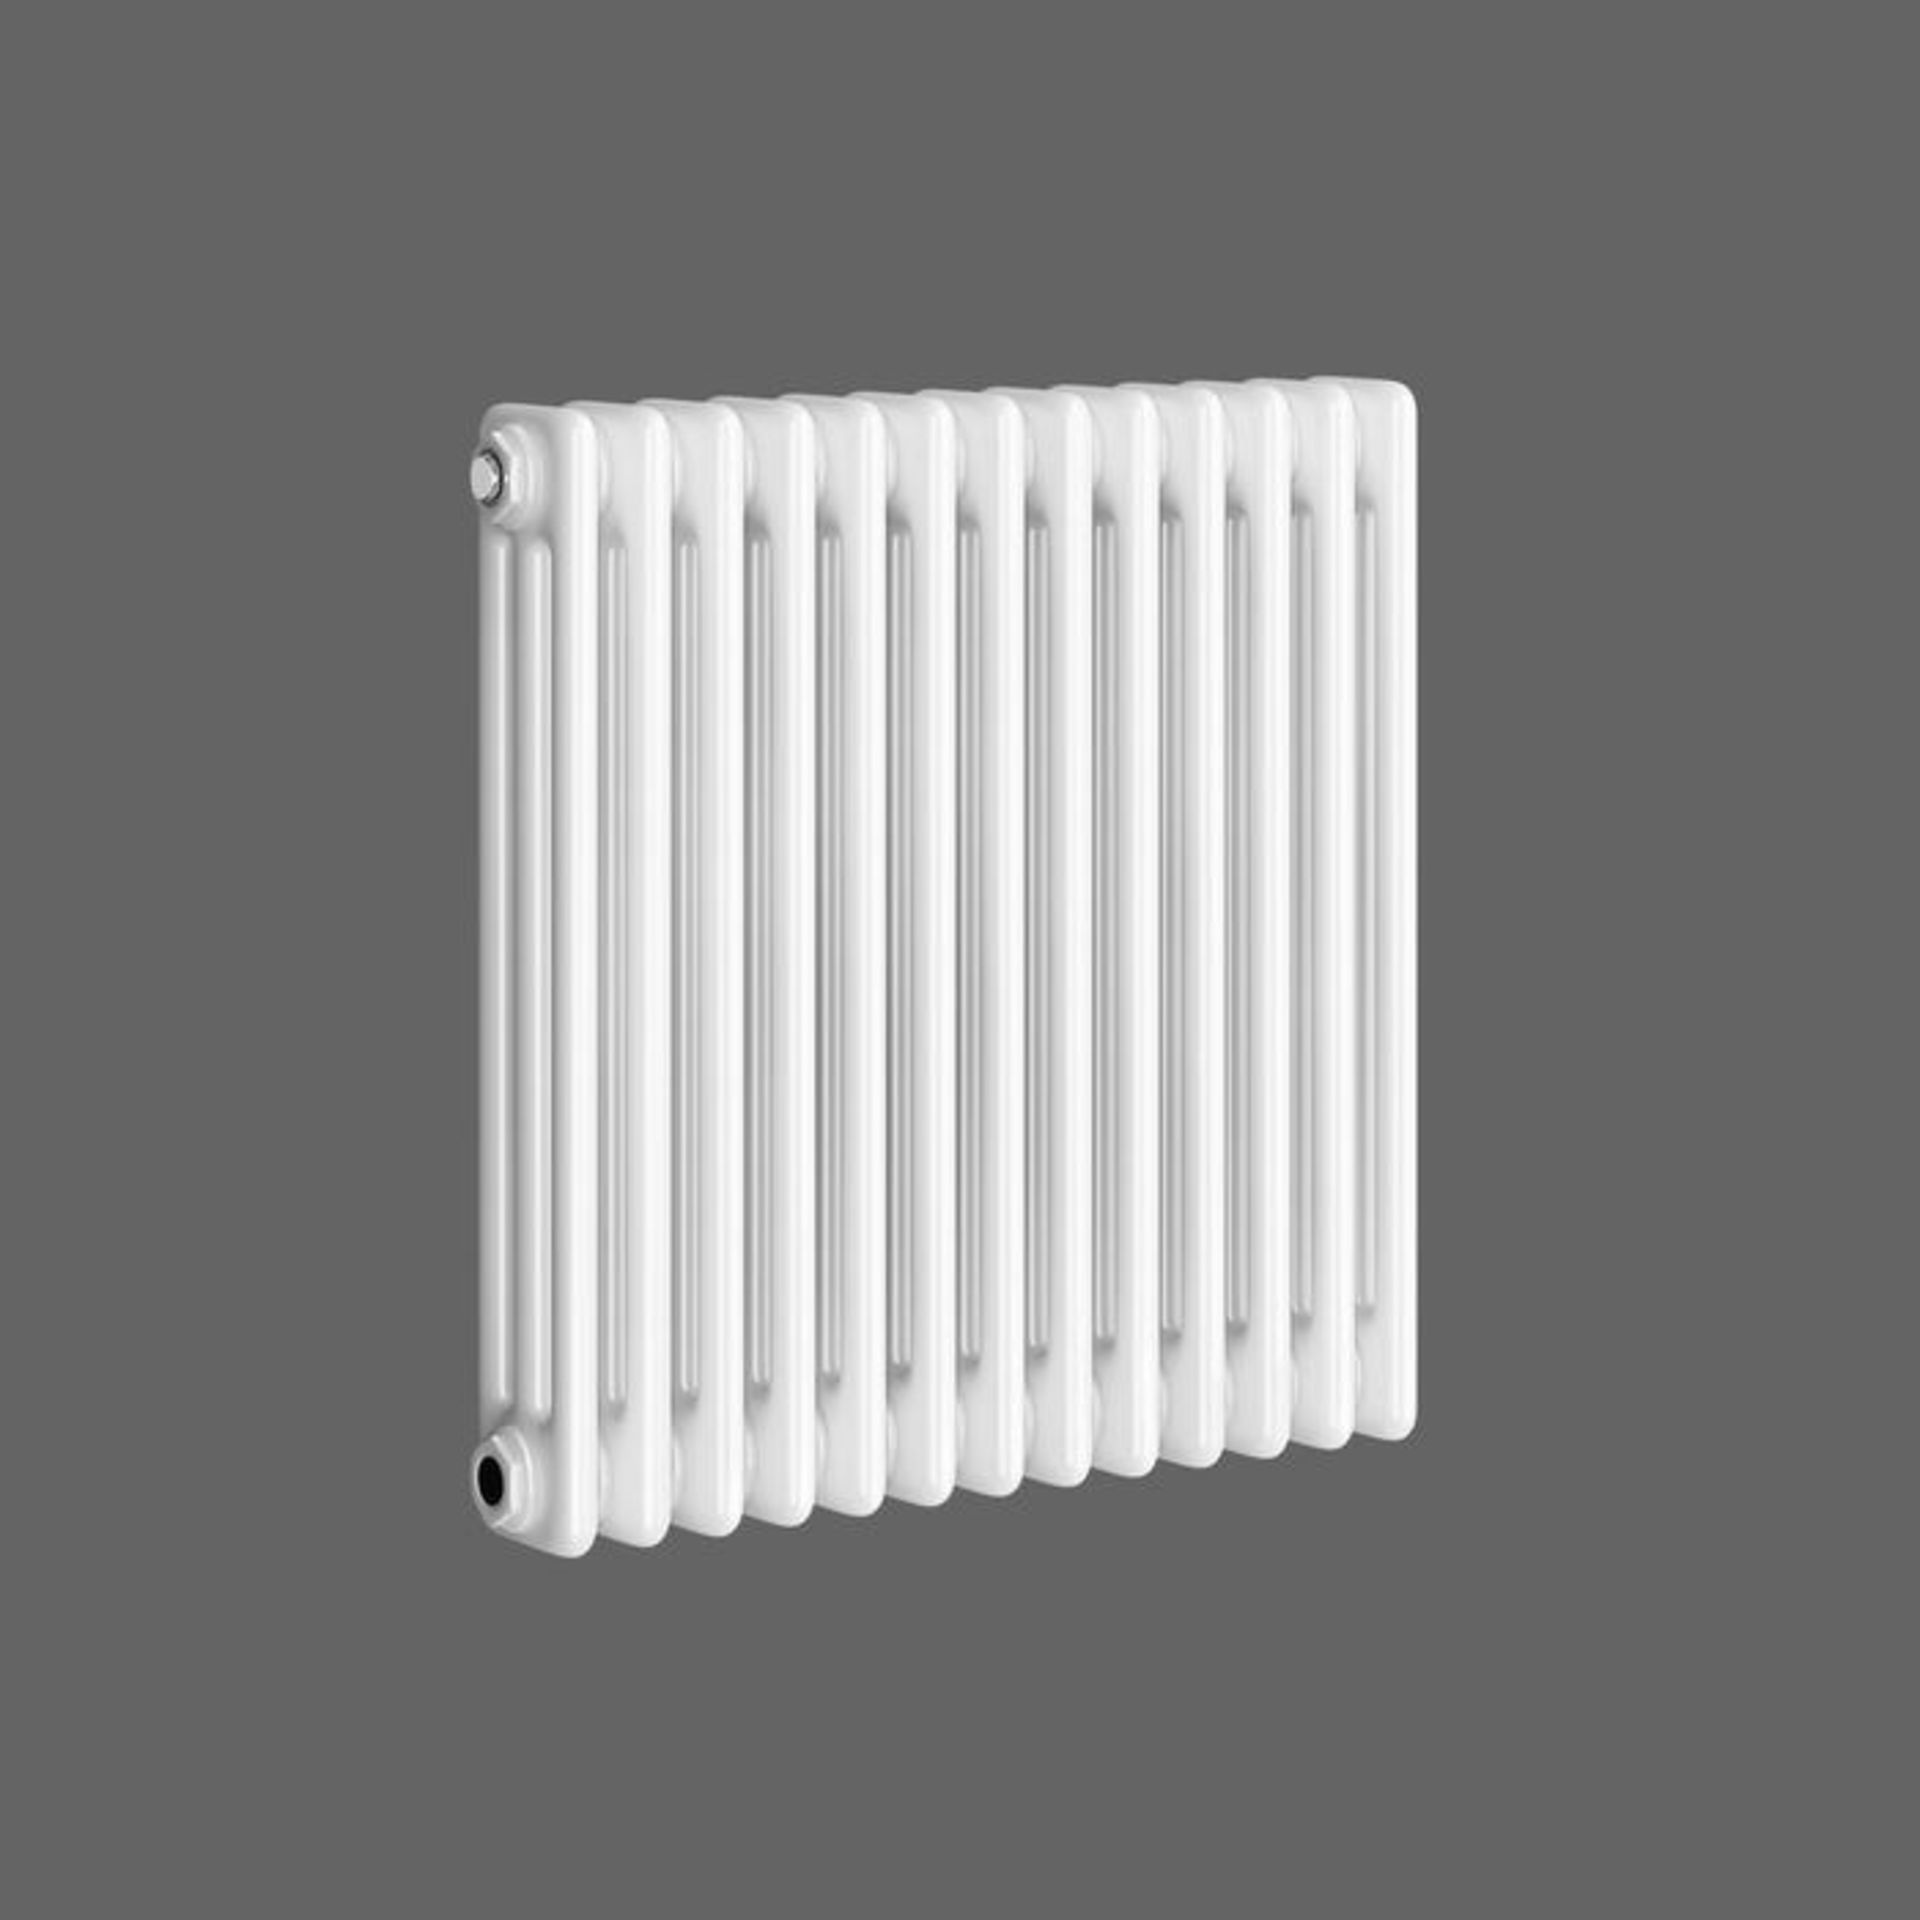 (XL14) 600x628mm White Triple Panel Horizontal Colosseum Traditional Radiator. RRP £389.99.For... - Image 3 of 3